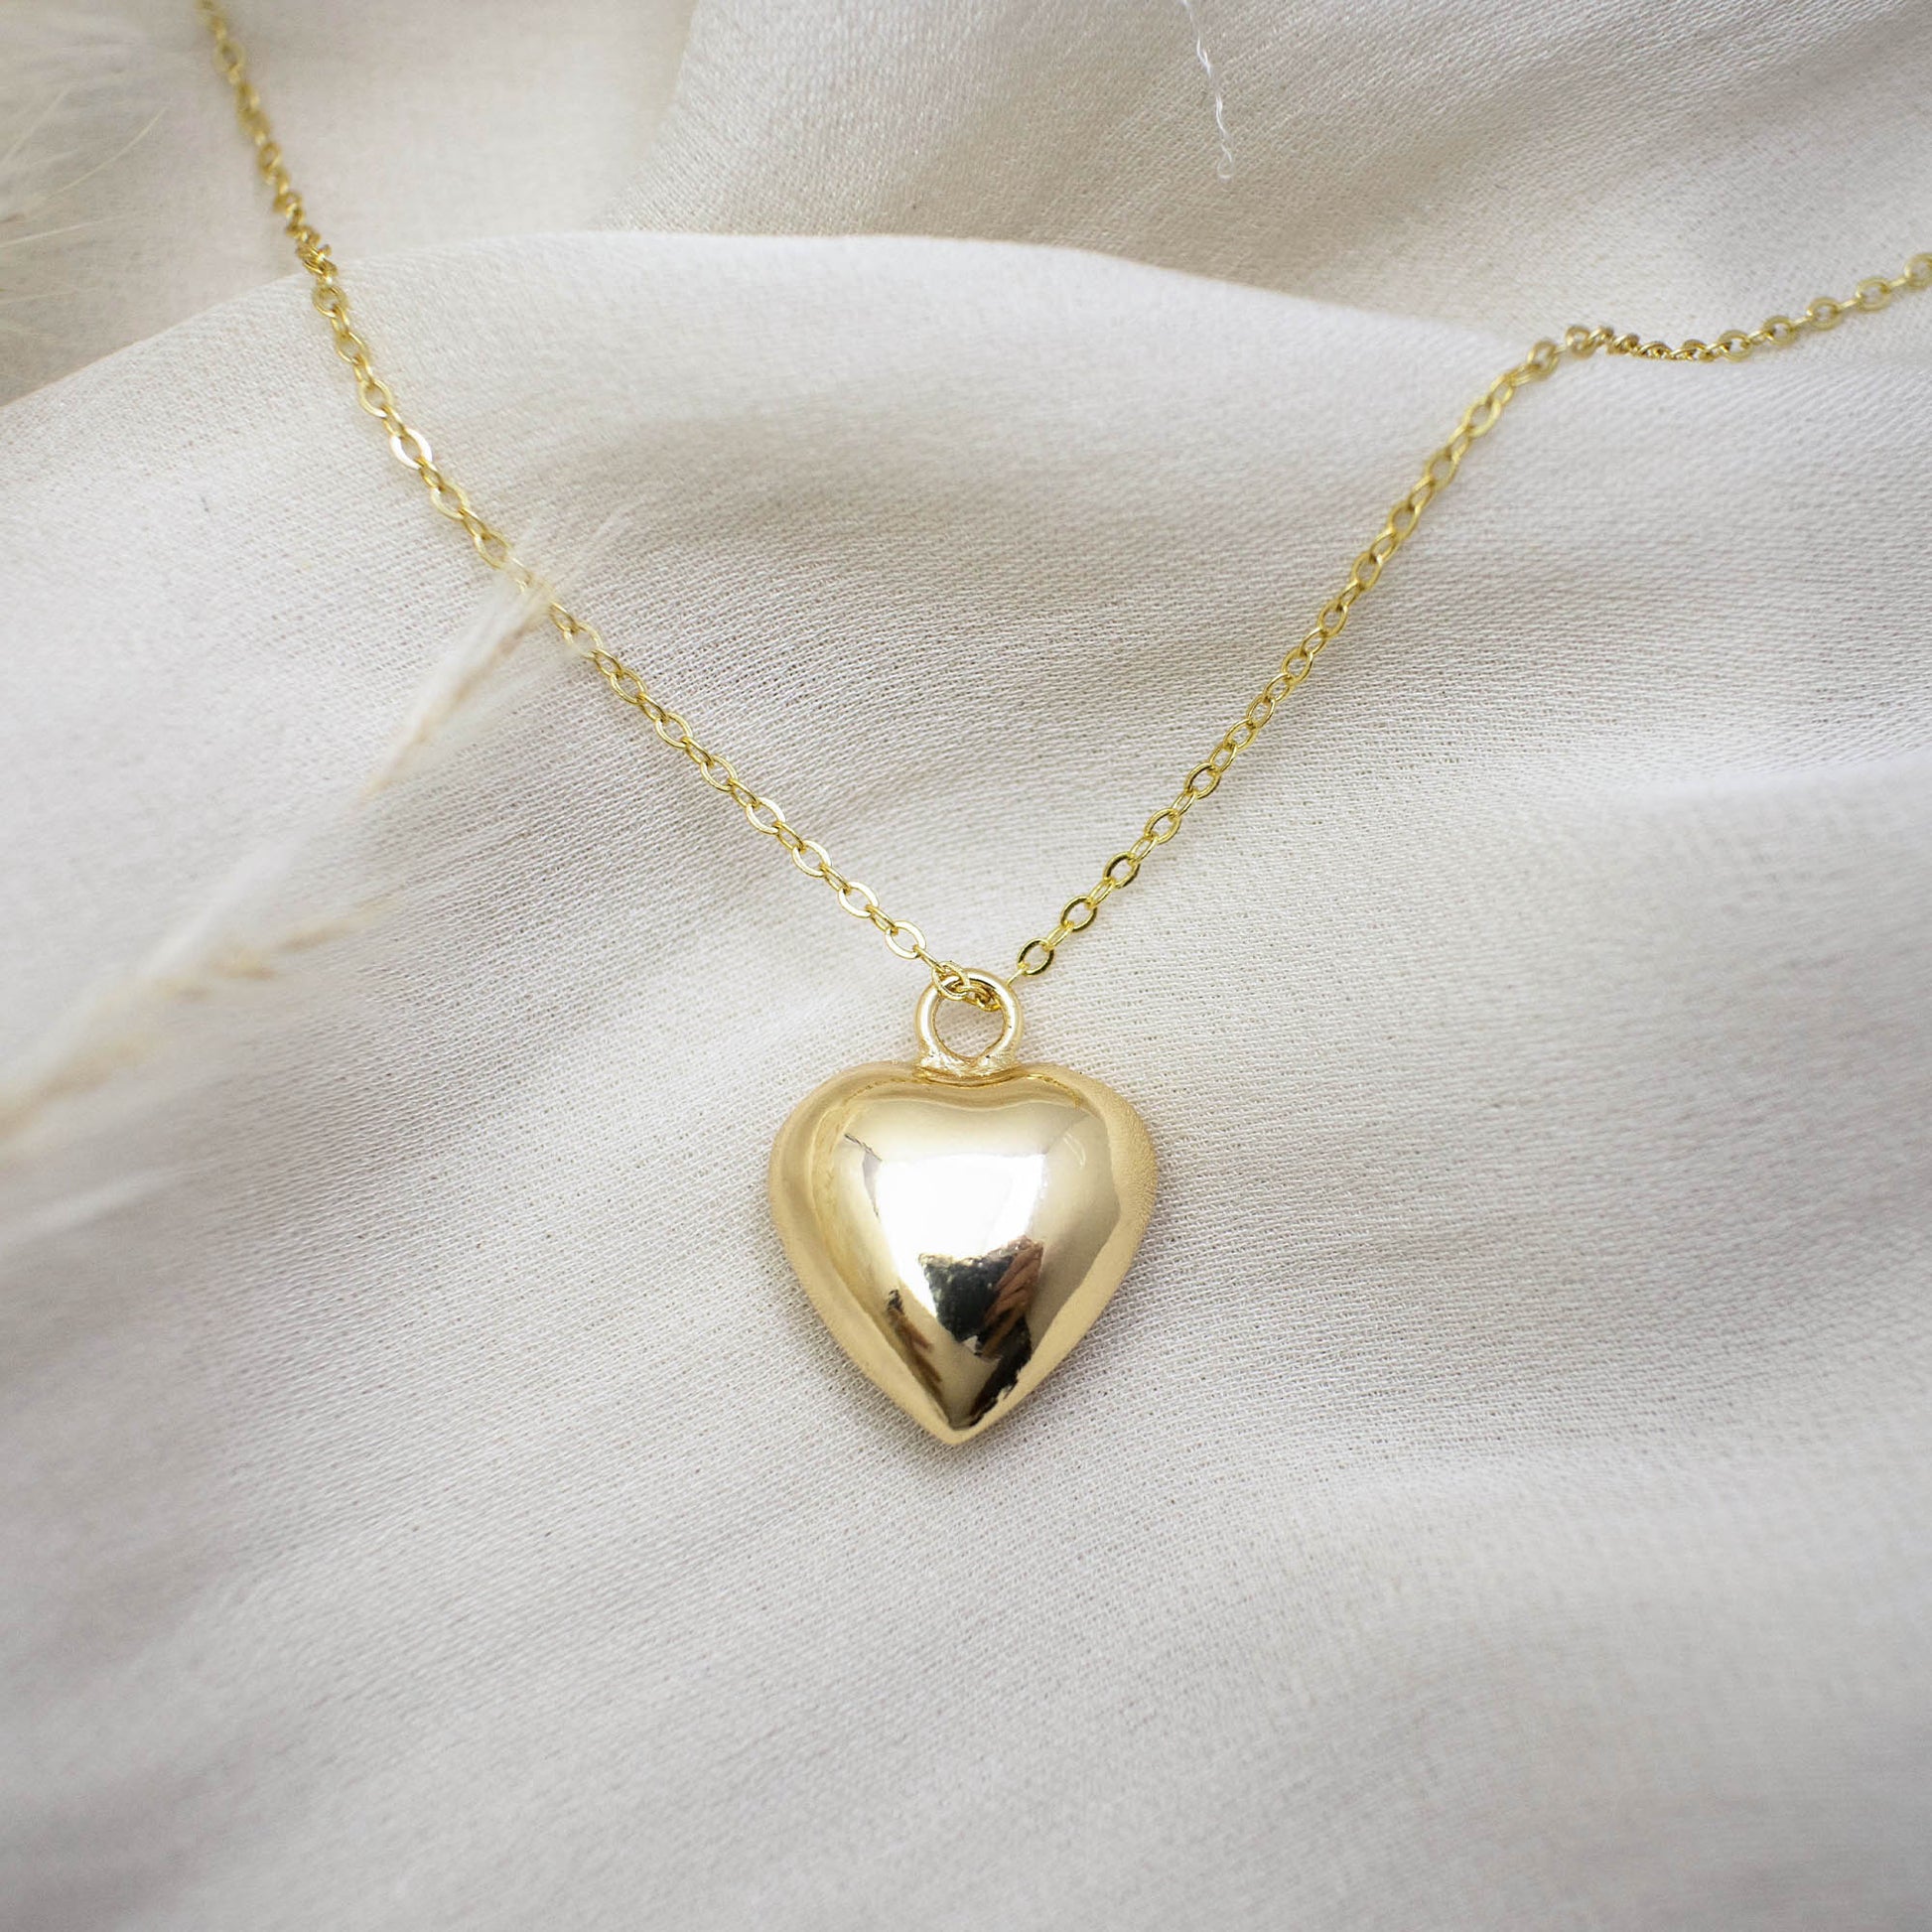 This photo features a thin chain necklace made of 14K gold-plated sterling silver, paired with a hollow heart-shaped charm.